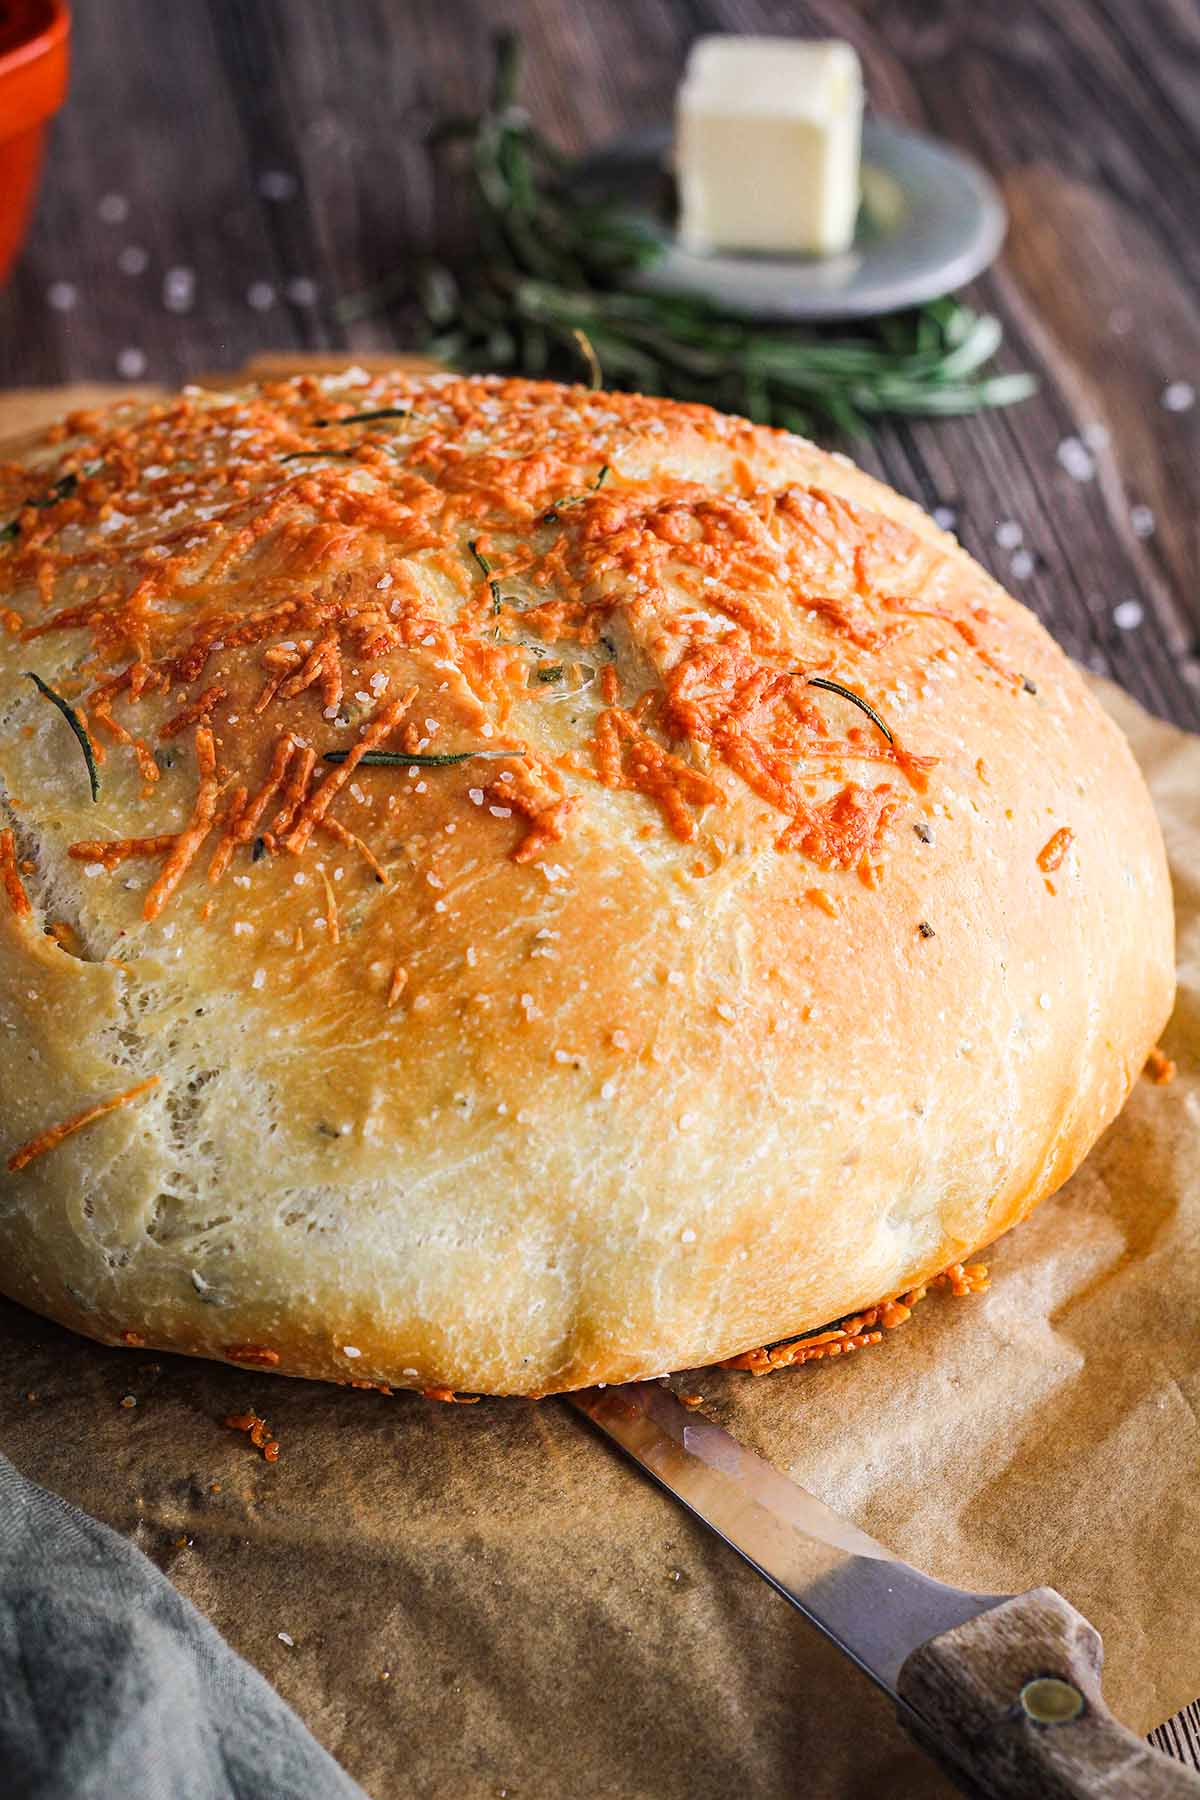 Why You’ll Love This Rosemary Parmesan Bread Recipe